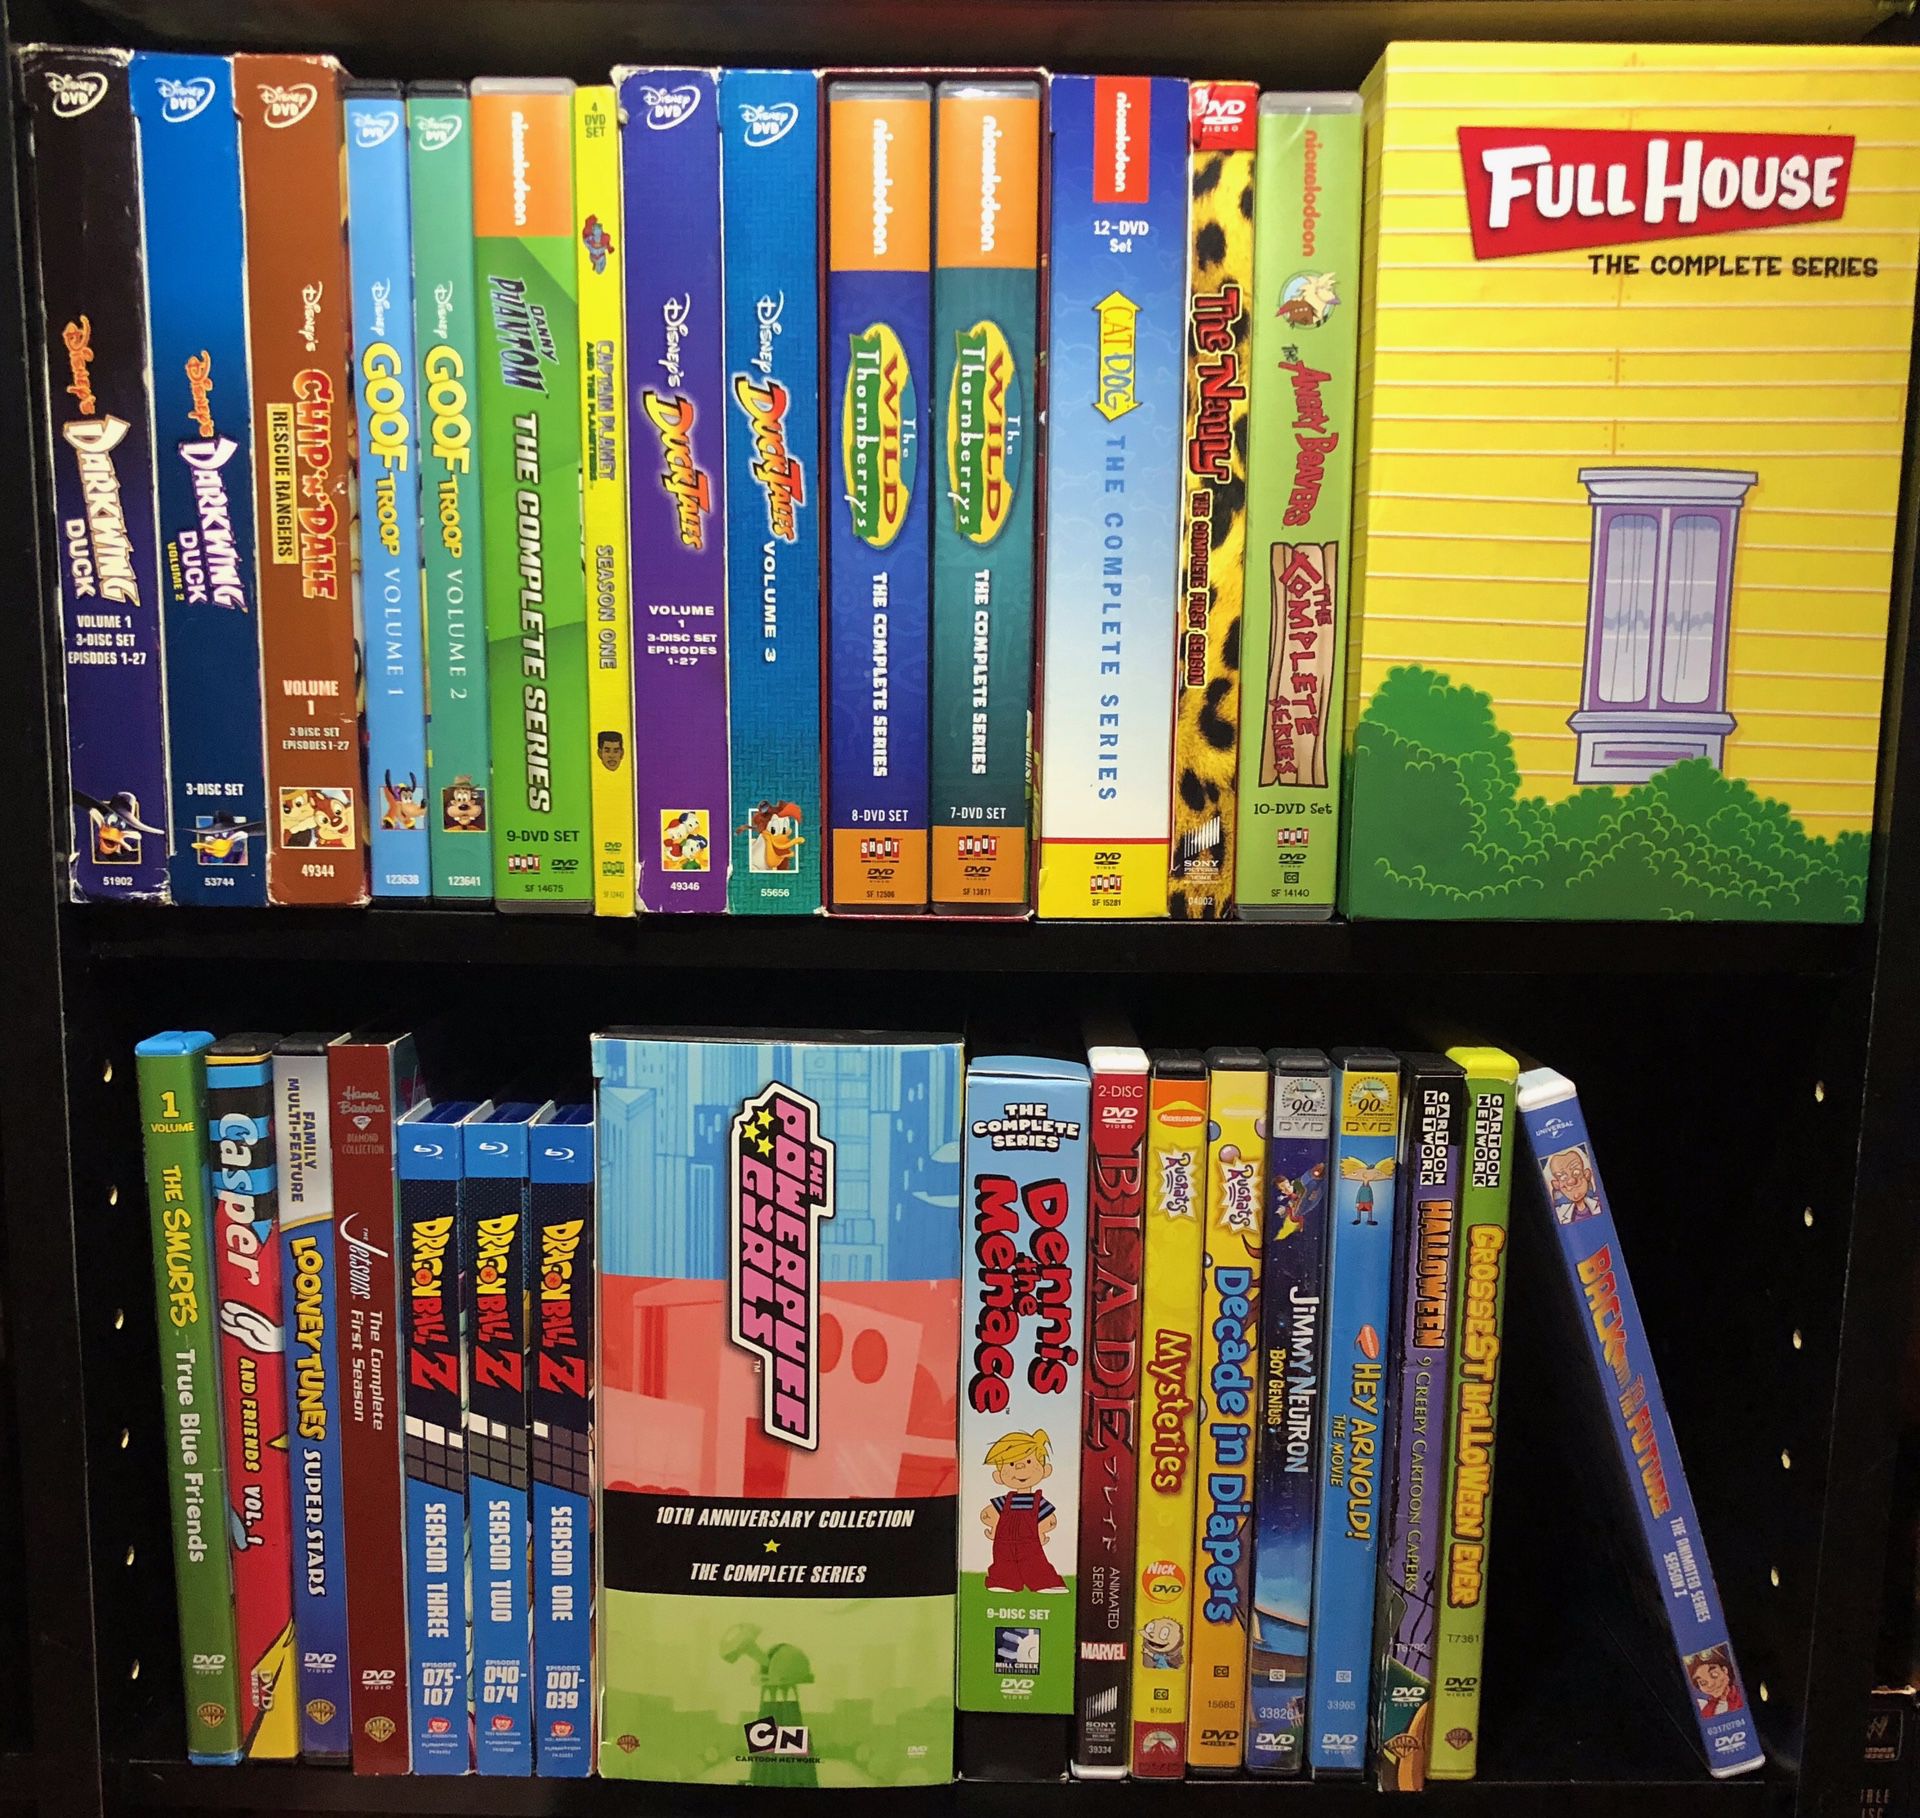 80s & 90s TV Shows Cartoons DVD Blu Ray - Full House, Disney, Nickelodeon  for Sale in Miami, FL - OfferUp